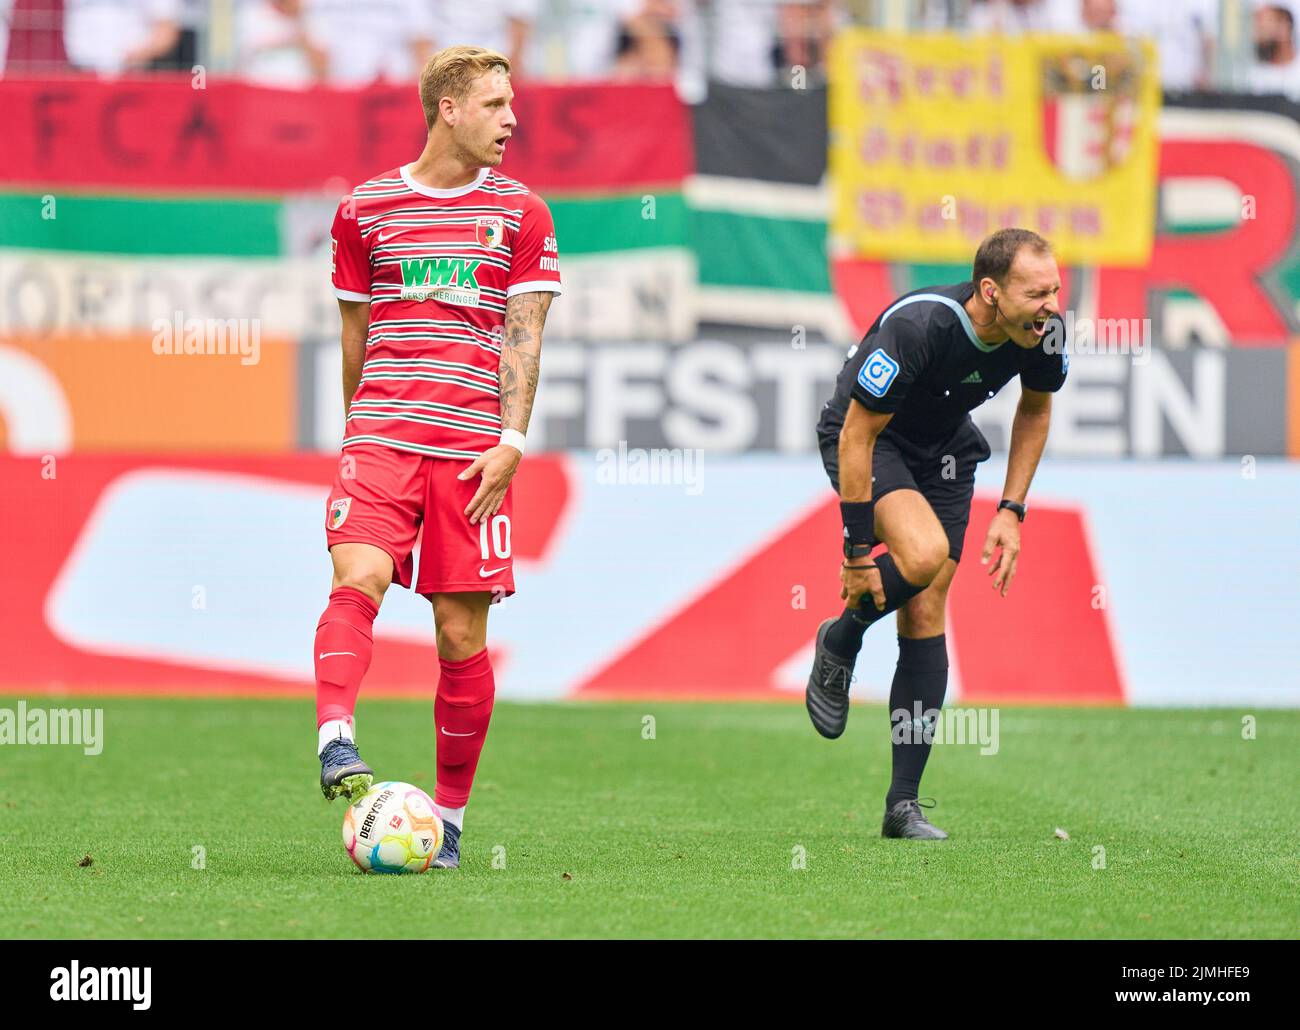 Referee Christian Dingert injury,  whistle, gestures, shows, watch, individual action, Schiedsrichter, Hauptschiedsrichter, schiri,  in the match FC AUGSBURG - SC FREIBURG 0-4 1.German Football League on Aug 06, 2022 in Augsburg, Germany. Season 2022/2023, matchday 1, 1.Bundesliga, FCB, Munich, 1.Spieltag © Peter Schatz / Alamy Live News    - DFL REGULATIONS PROHIBIT ANY USE OF PHOTOGRAPHS as IMAGE SEQUENCES and/or QUASI-VIDEO - Stock Photo